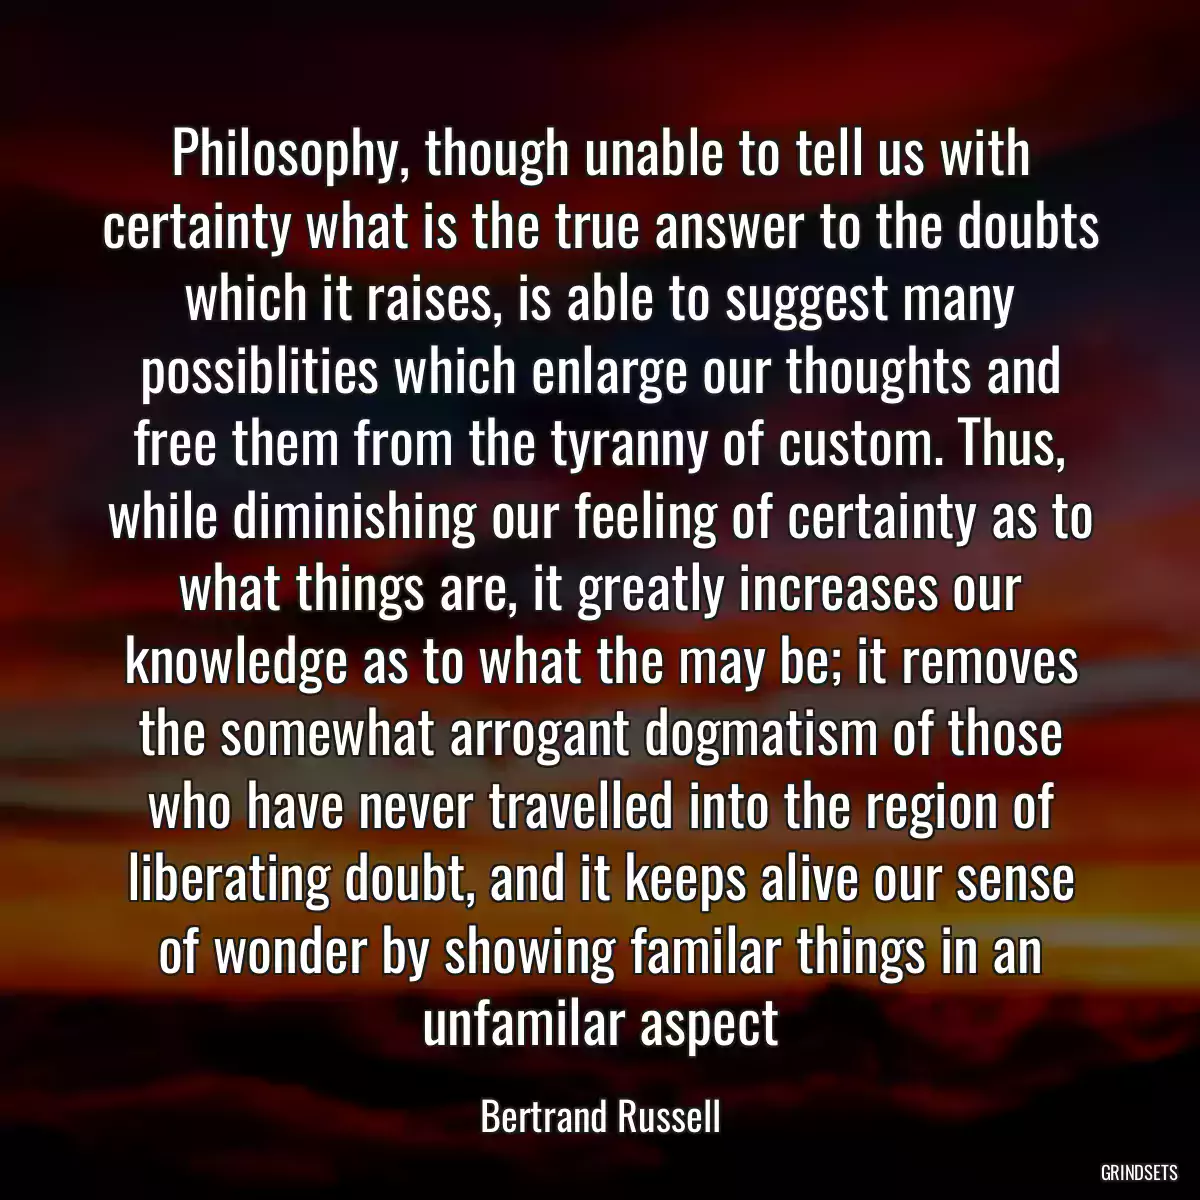 Philosophy, though unable to tell us with certainty what is the true answer to the doubts which it raises, is able to suggest many possiblities which enlarge our thoughts and free them from the tyranny of custom. Thus, while diminishing our feeling of certainty as to what things are, it greatly increases our knowledge as to what the may be; it removes the somewhat arrogant dogmatism of those who have never travelled into the region of liberating doubt, and it keeps alive our sense of wonder by showing familar things in an unfamilar aspect